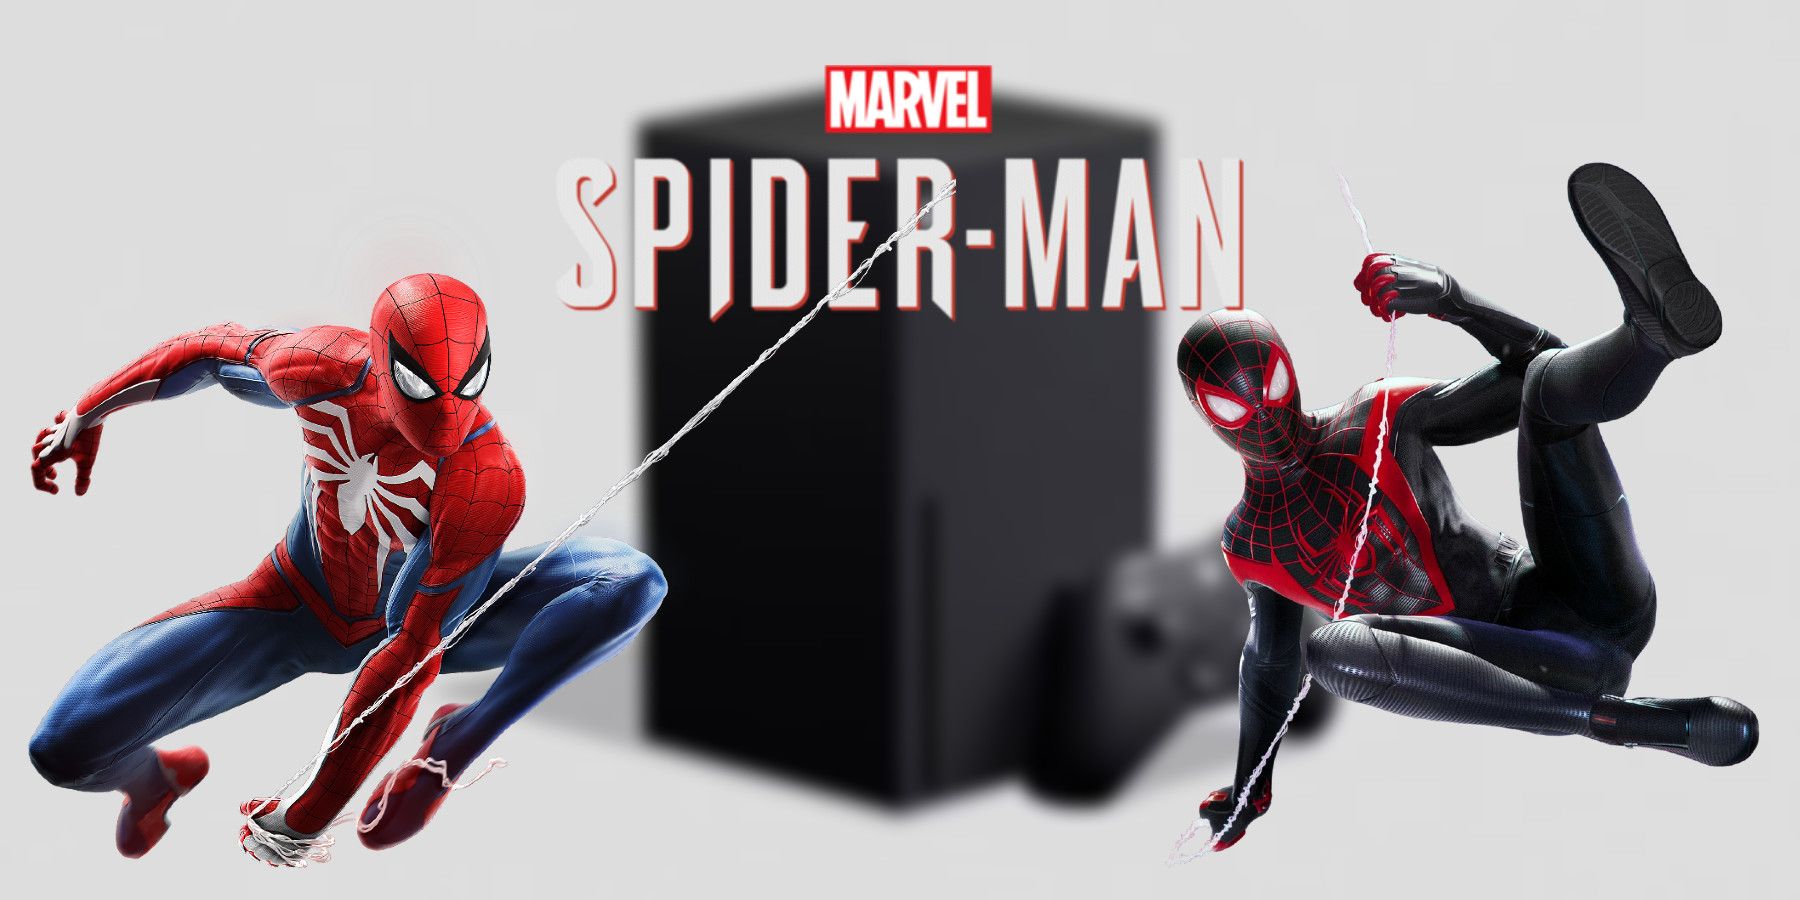 Marvel's Avengers: Is Spider-Man Coming to Xbox Series X, Xbox One